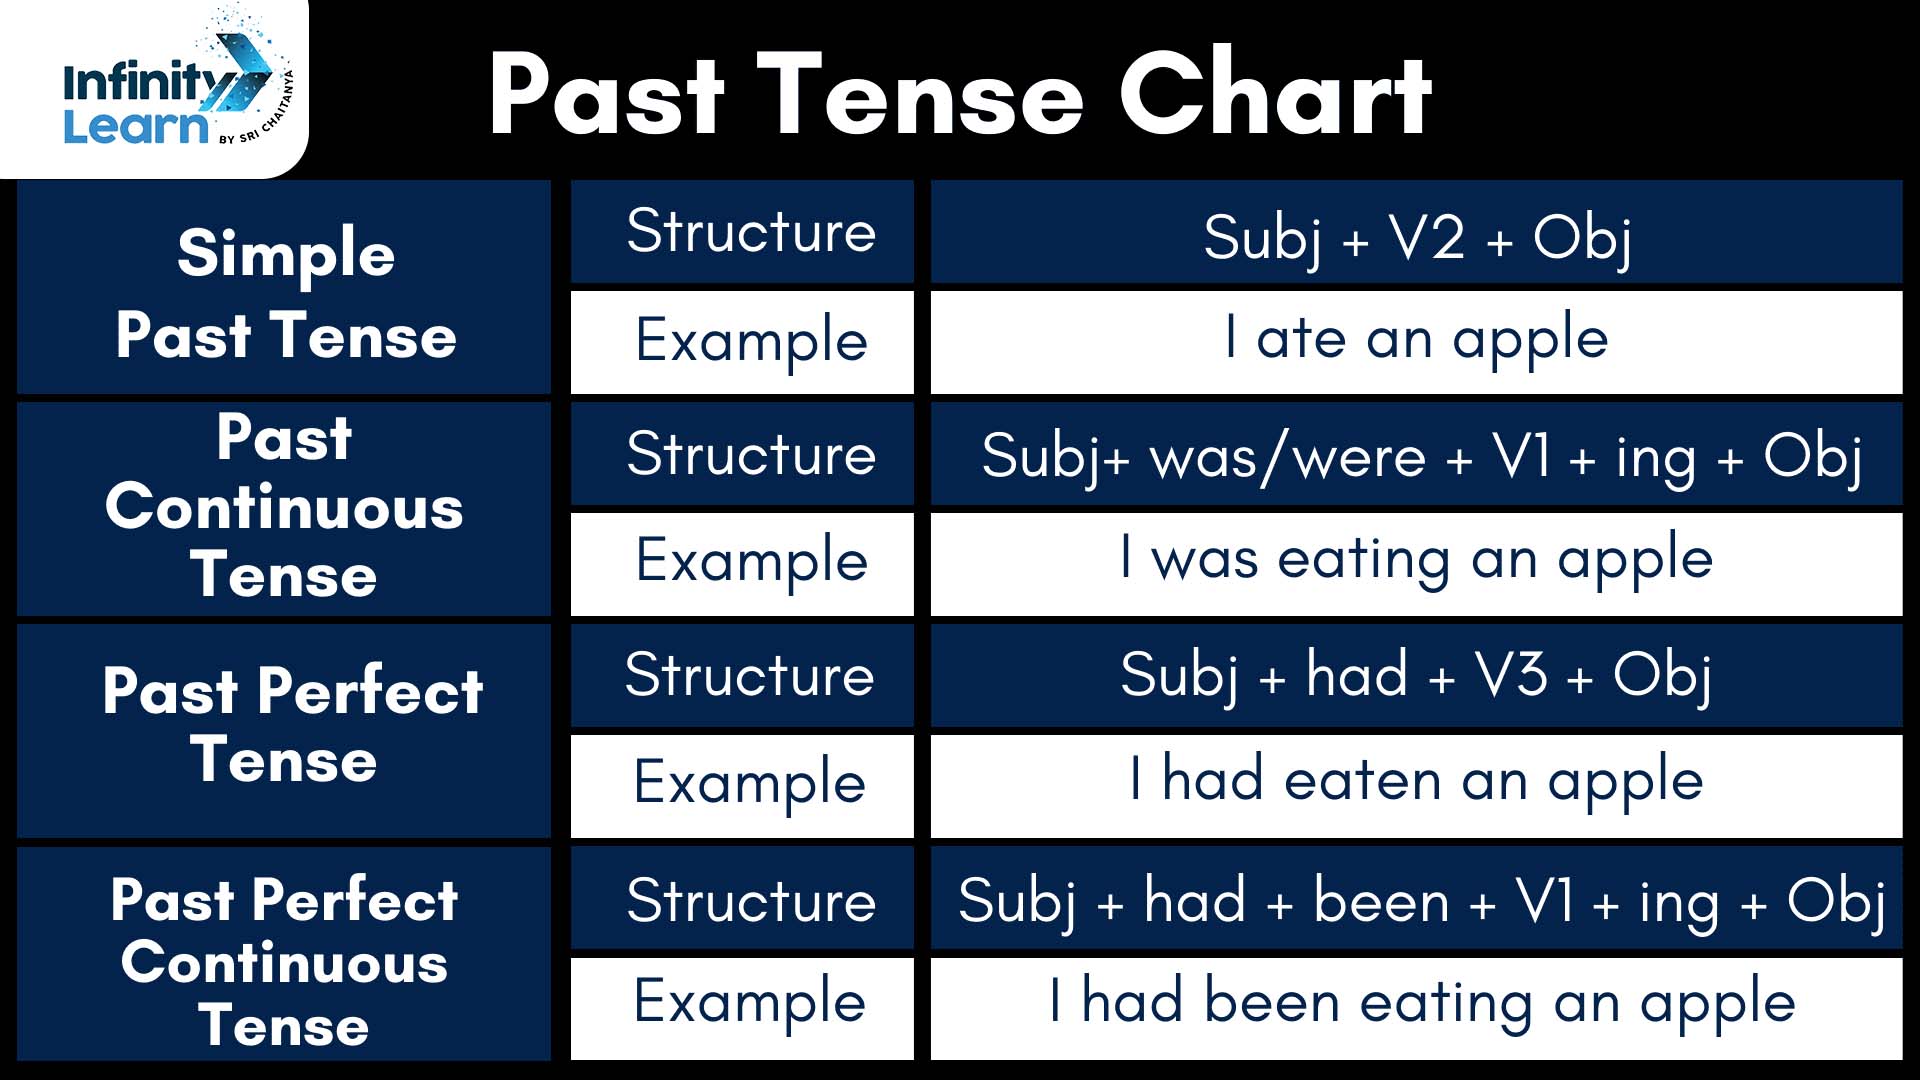 Example sentences related to simple past tense, 20 Sentences in